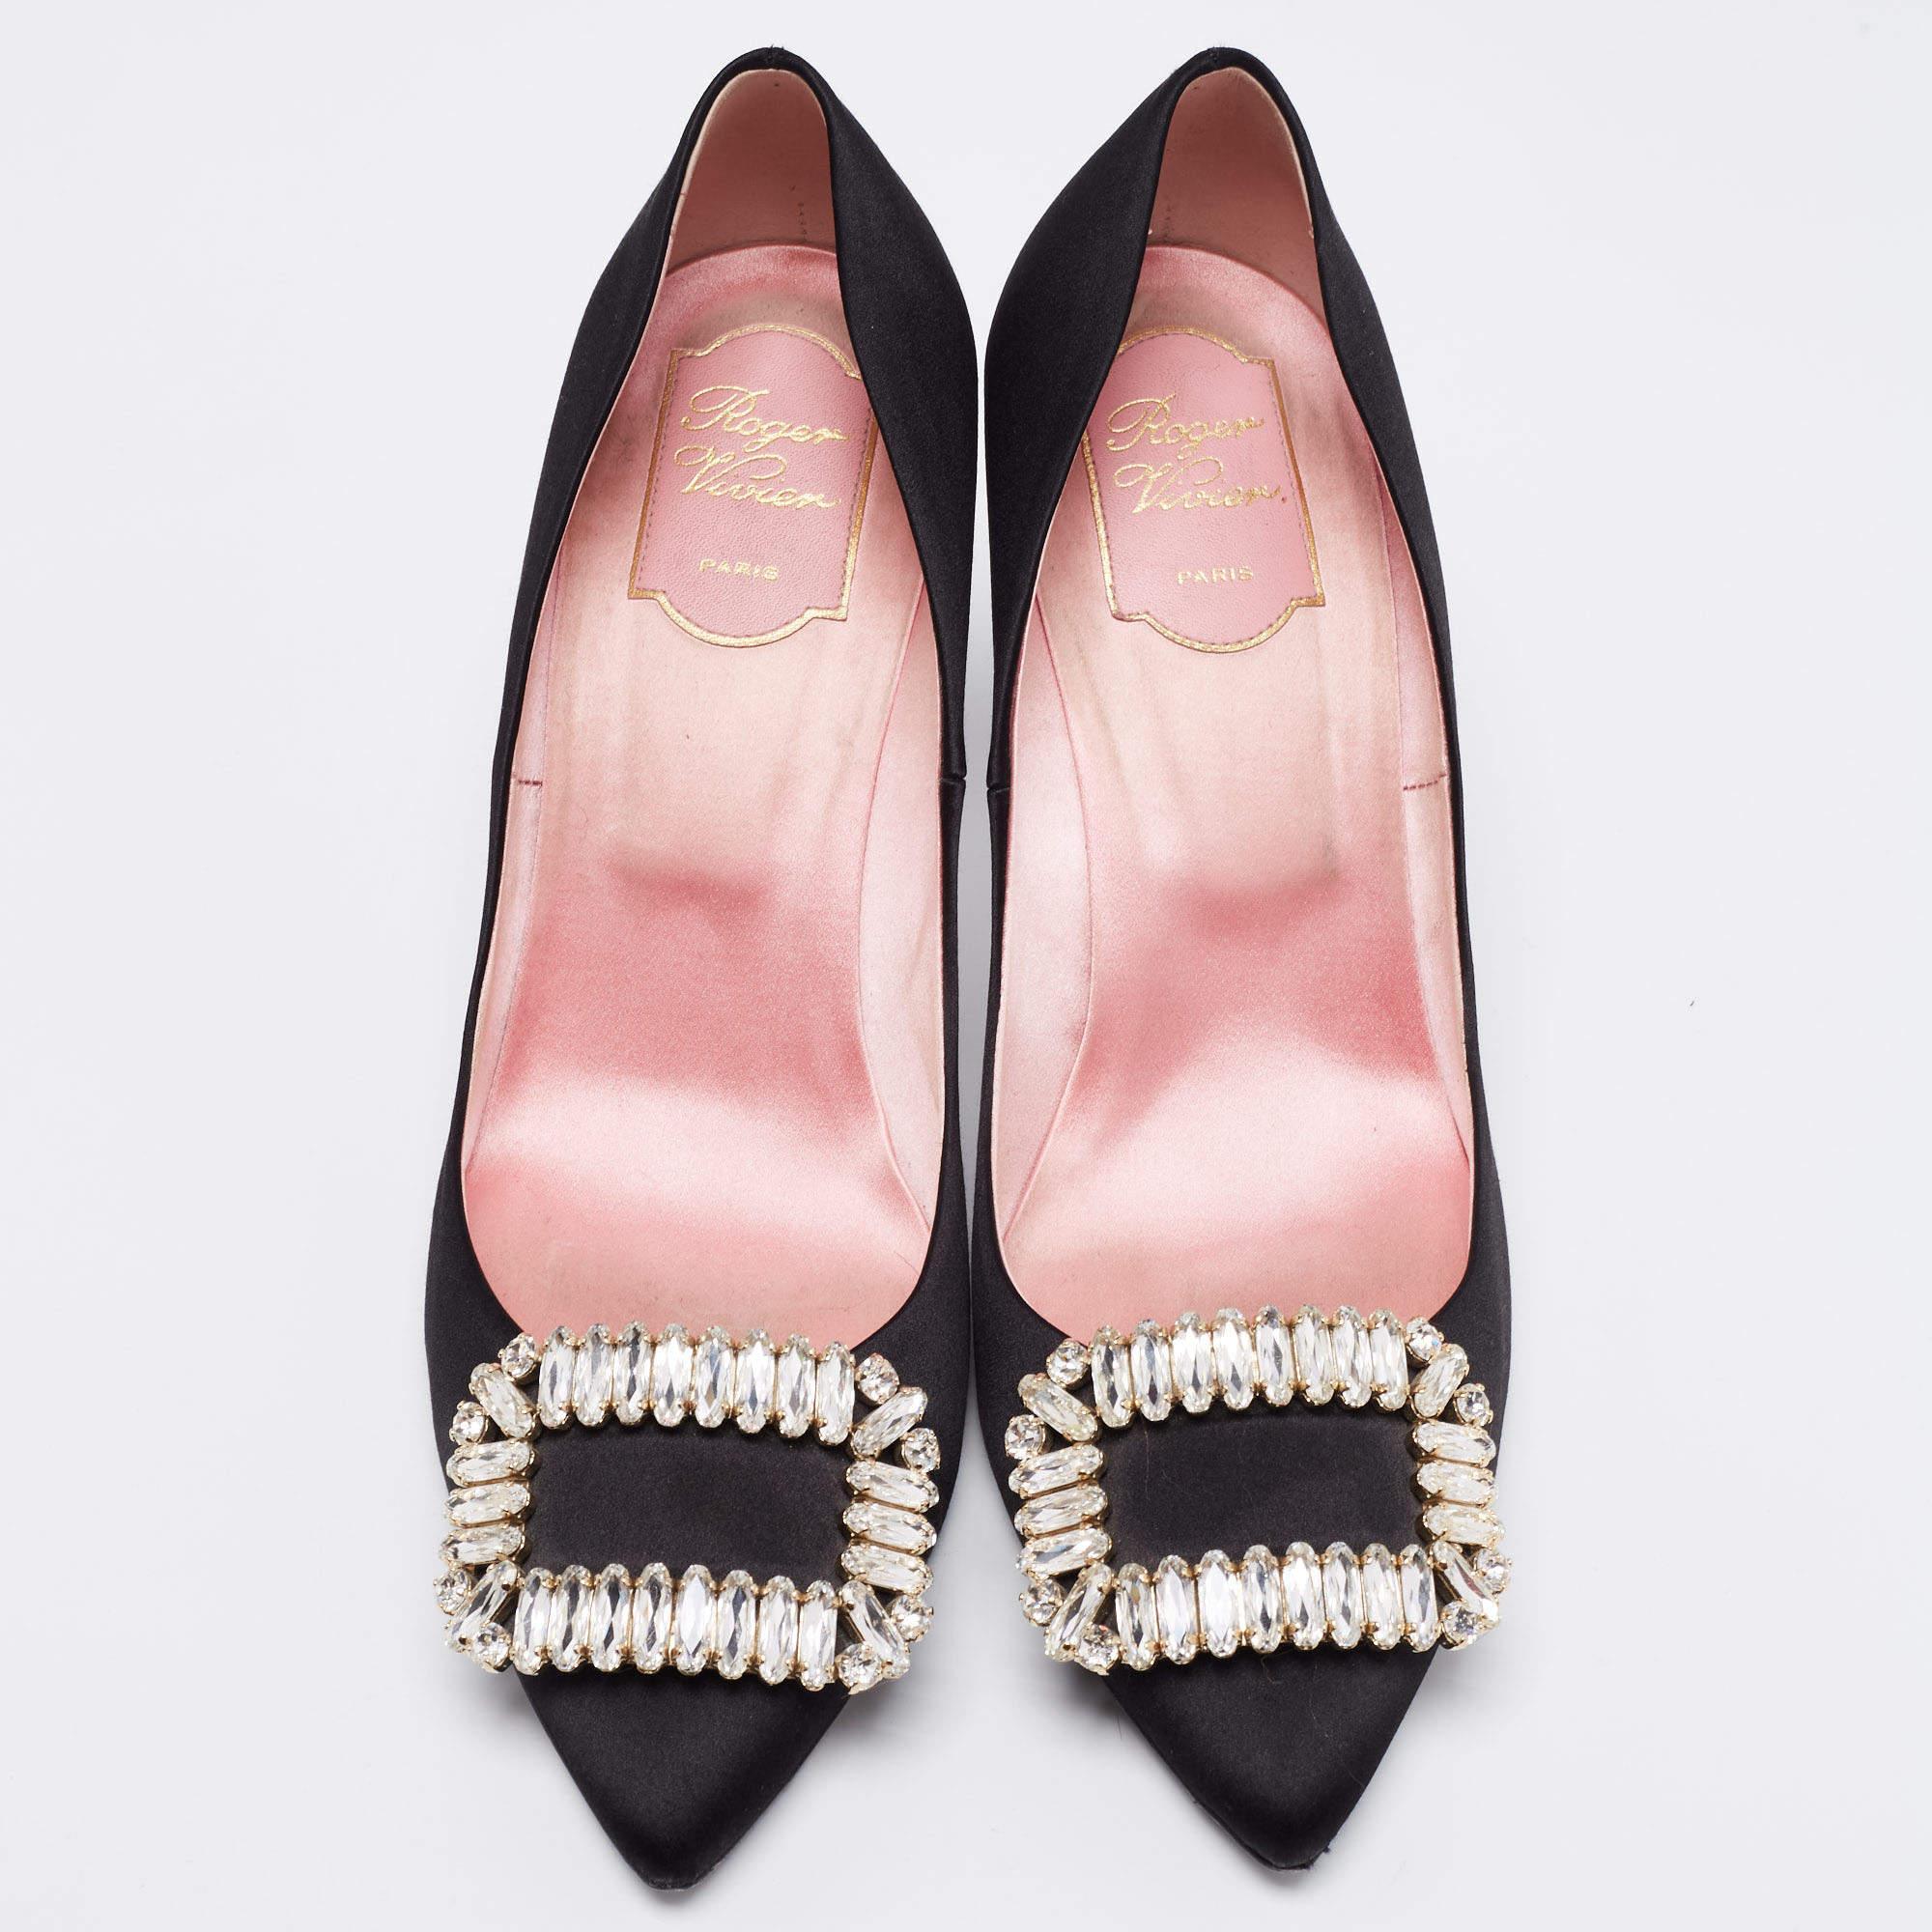 Creations from Roger Vivier are simply beautiful and have a truly timeless appeal. These black pumps validate just that! They are crafted from satin and feature pointed toes. They flaunt the shimmering embellished accents on the uppers and stand